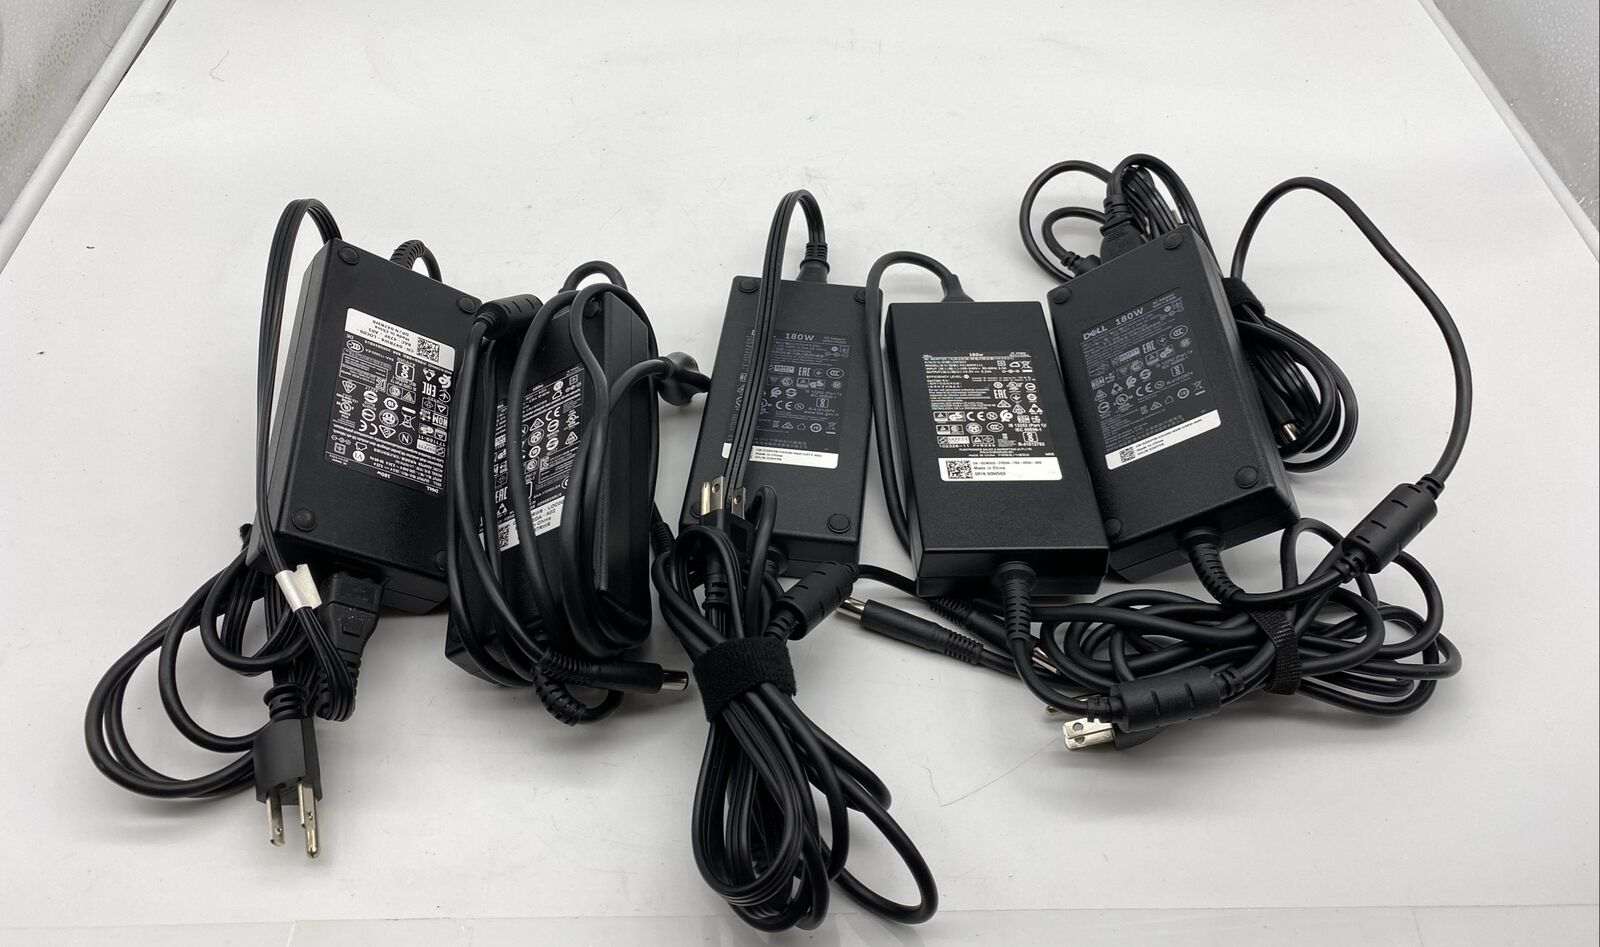 Lot of 5 Genuine Dell 180W Laptop Charger AC Adapter LA180PM180 19.5V